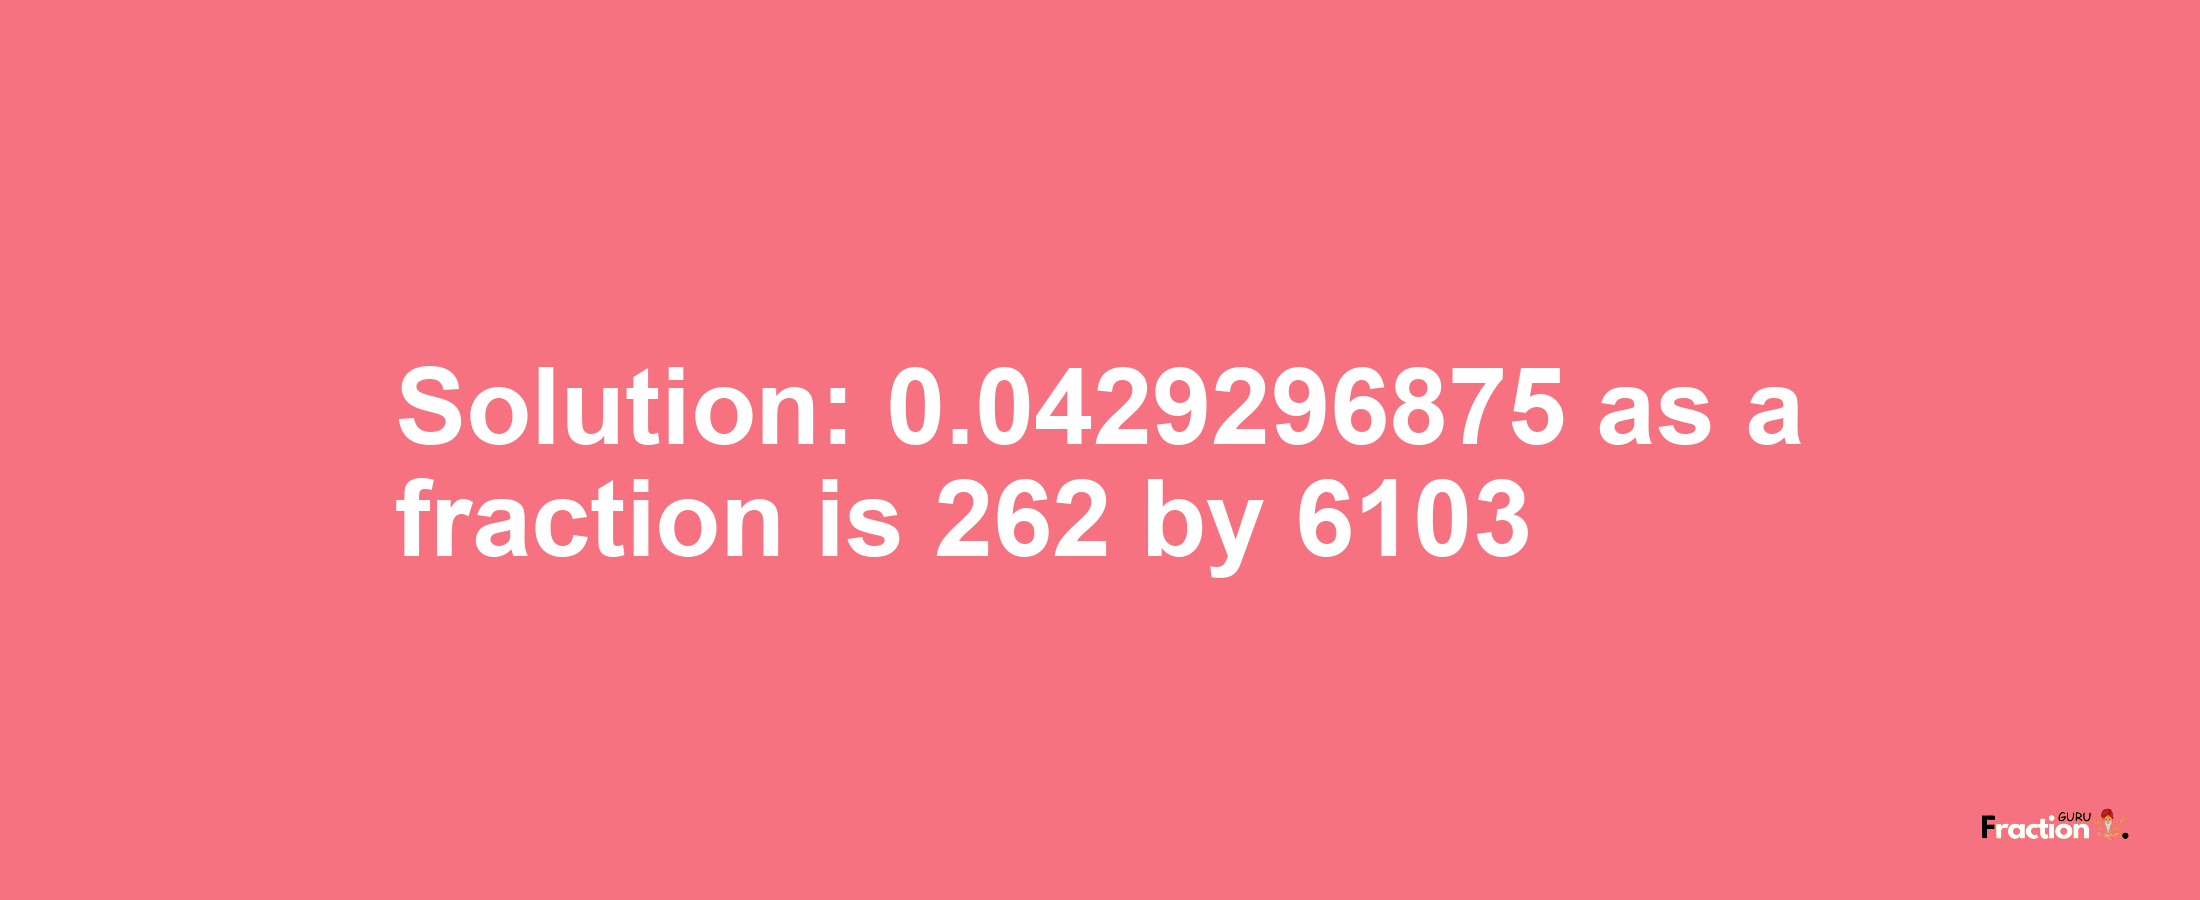 Solution:0.0429296875 as a fraction is 262/6103